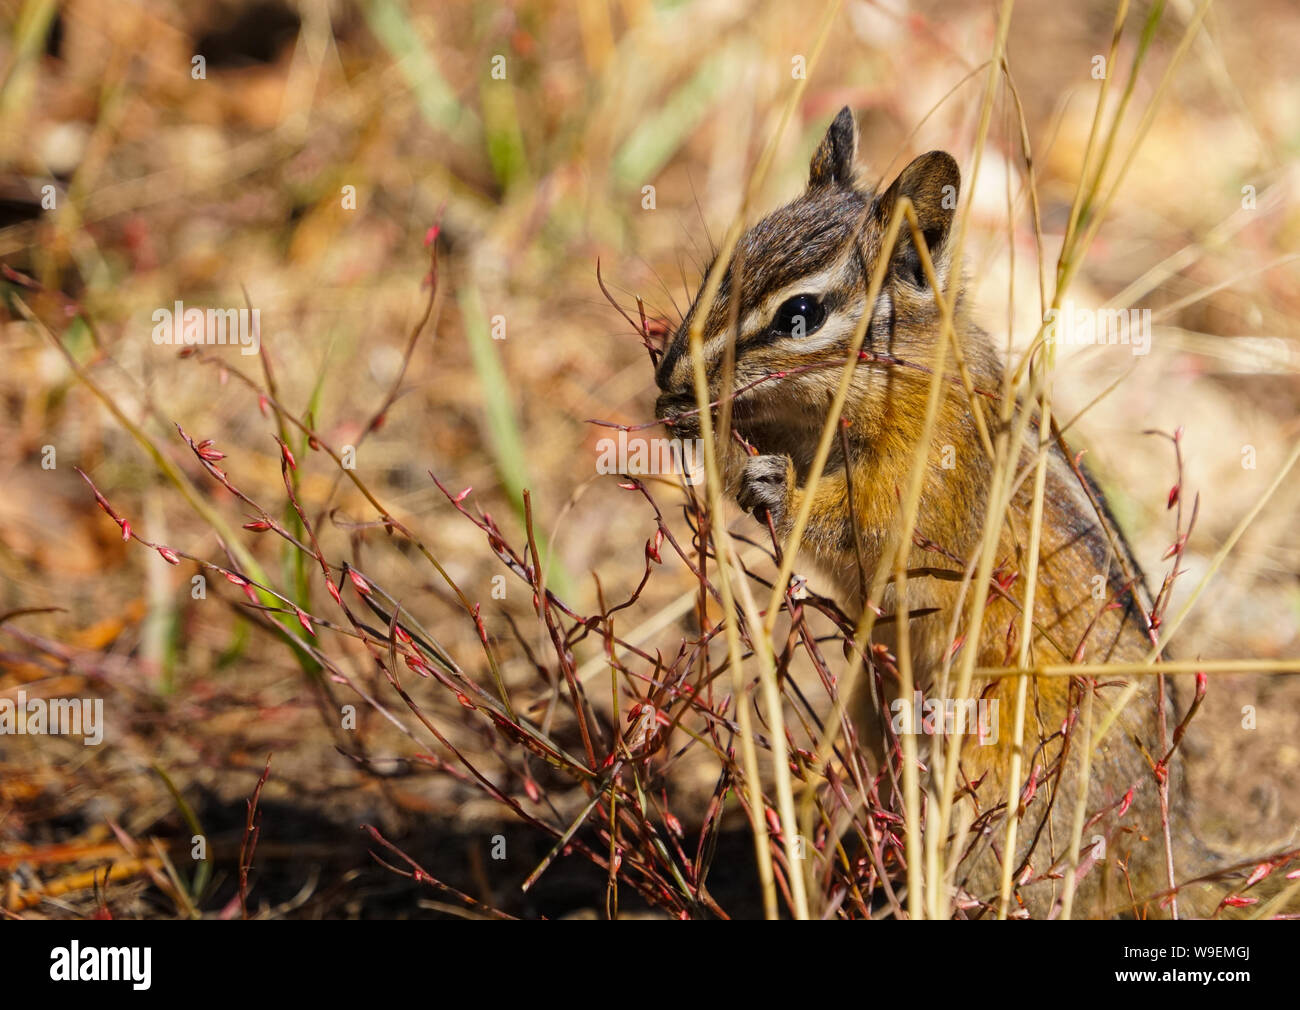 A Small Chipmunk Enjoying an Afternoon Snack Stock Photo